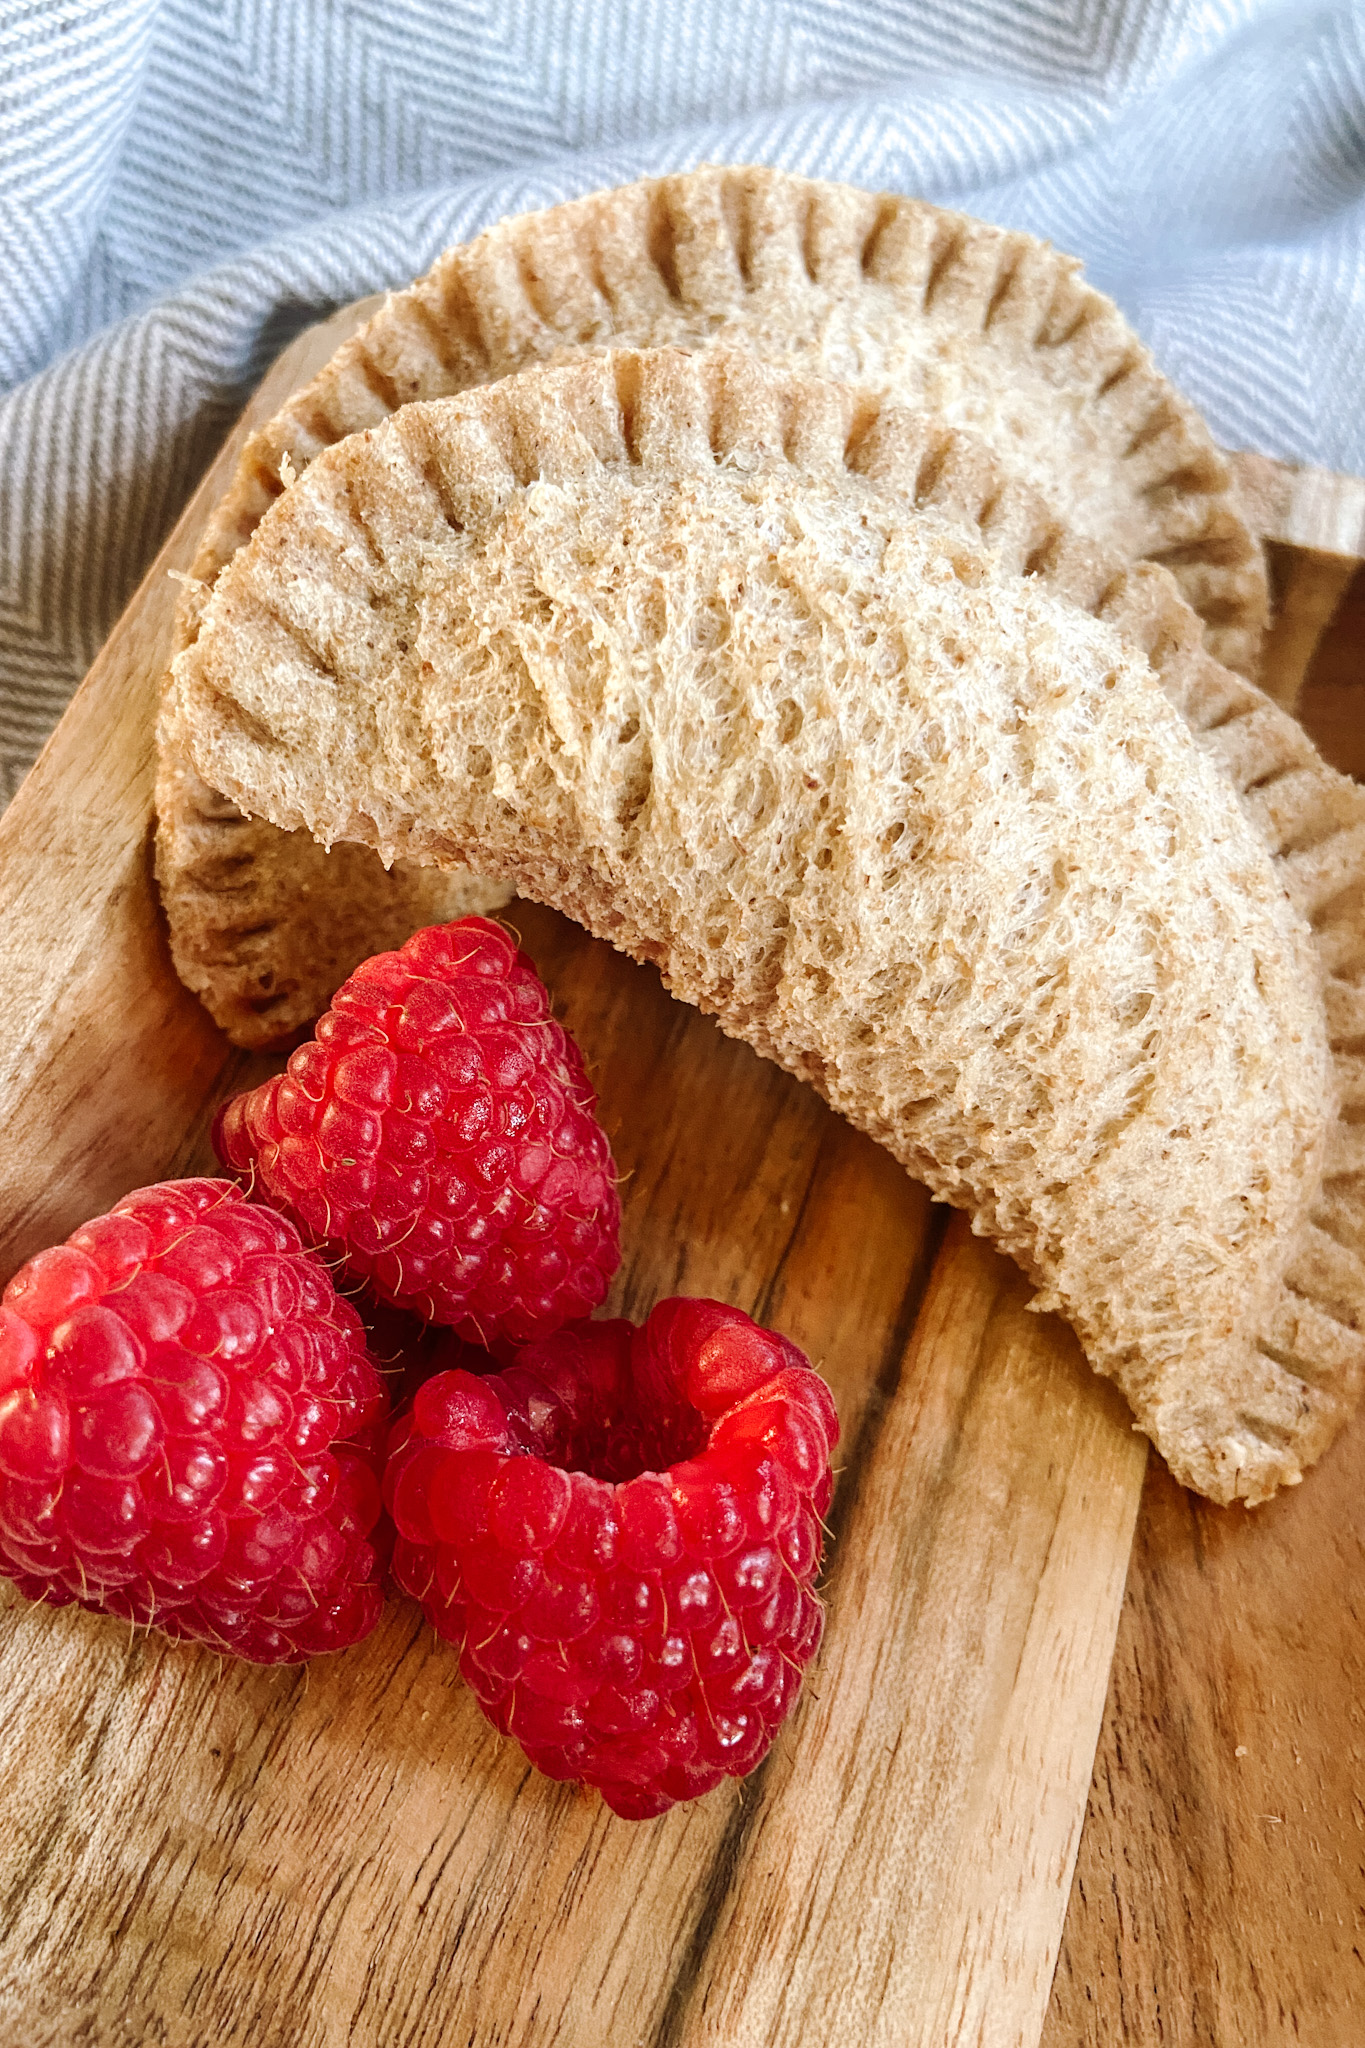 Peanut butter and empanada sandwiches served with raspberries